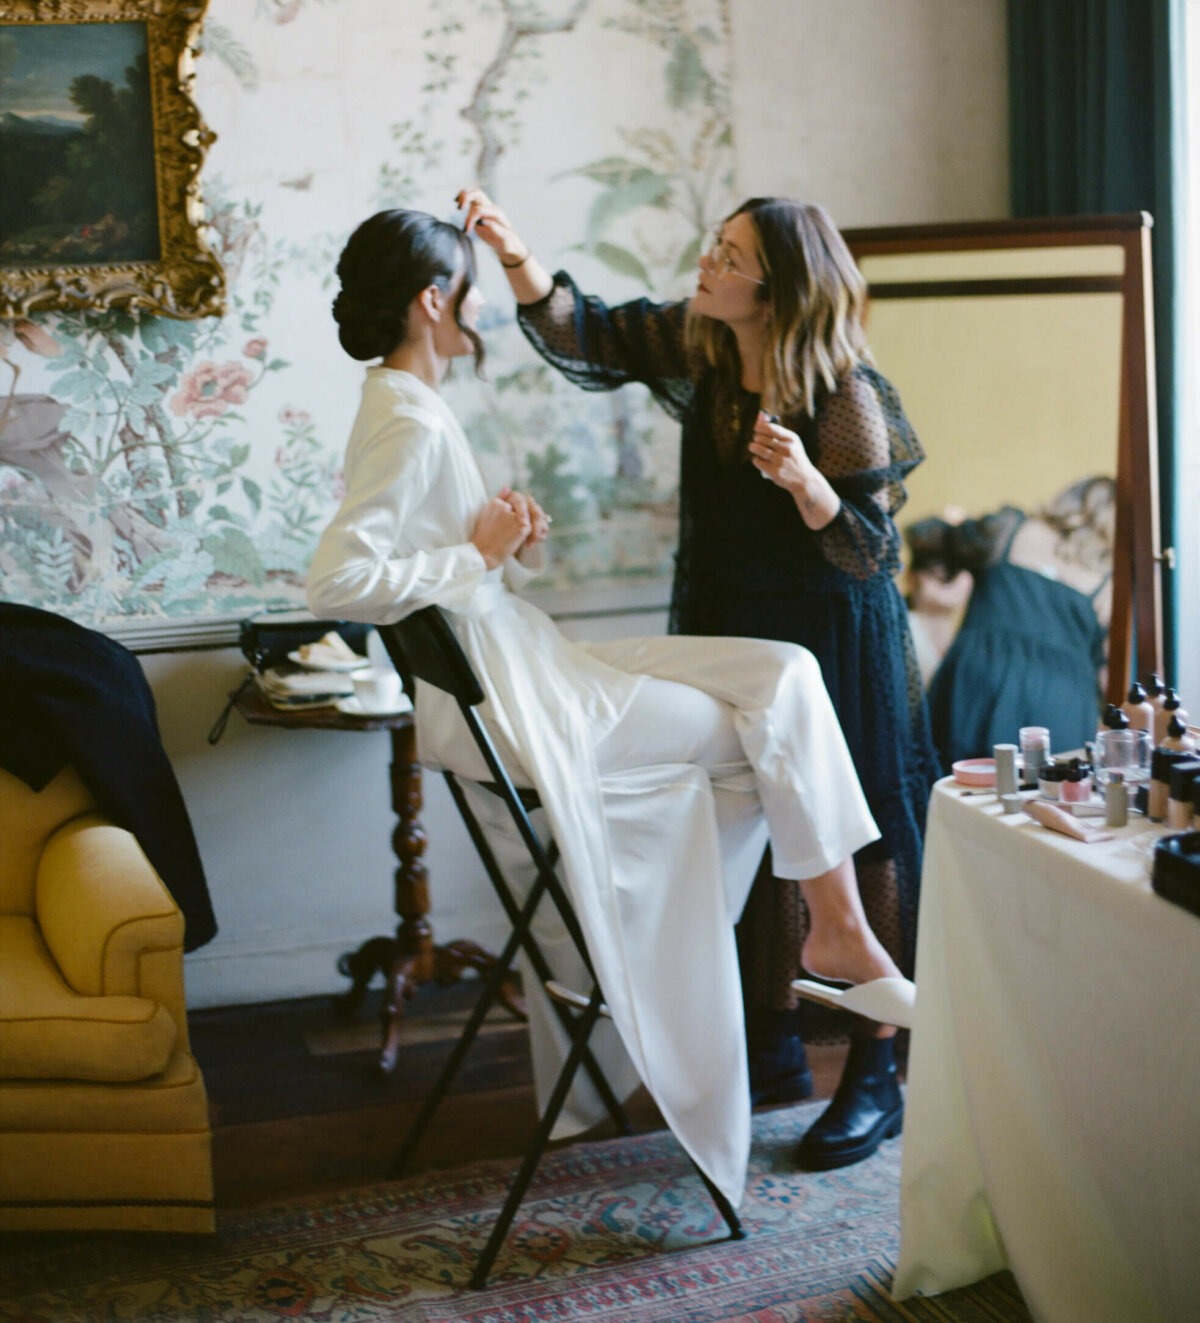 Bride in Bridal Suite getting ready in the Japan Room at St Giles House in her White Silk Pyjamas.